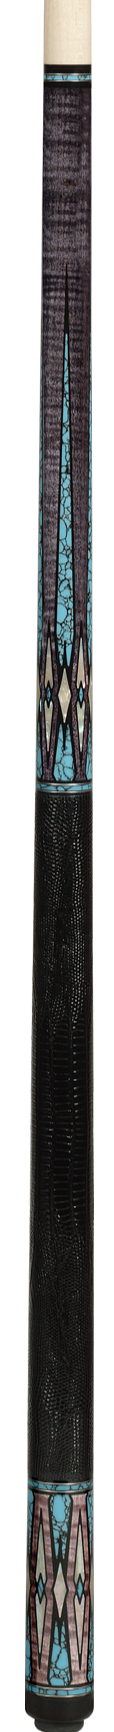 Pechauer Pechauer PL-35 Limited Edition Pool Cue Pool Cue